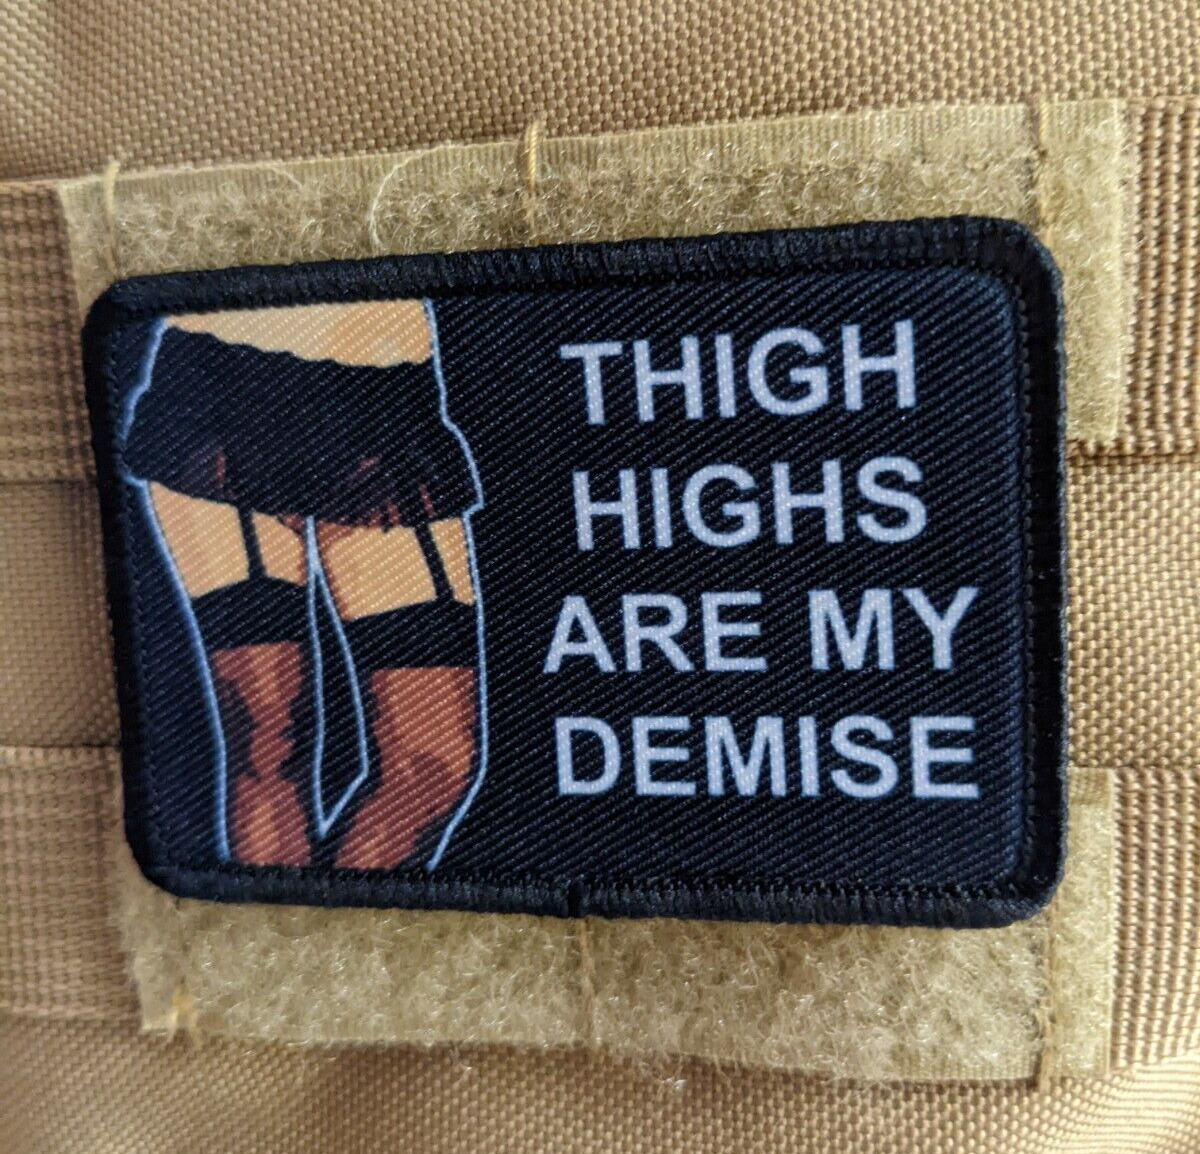 Thigh highs are my demise sexy  funny 2\